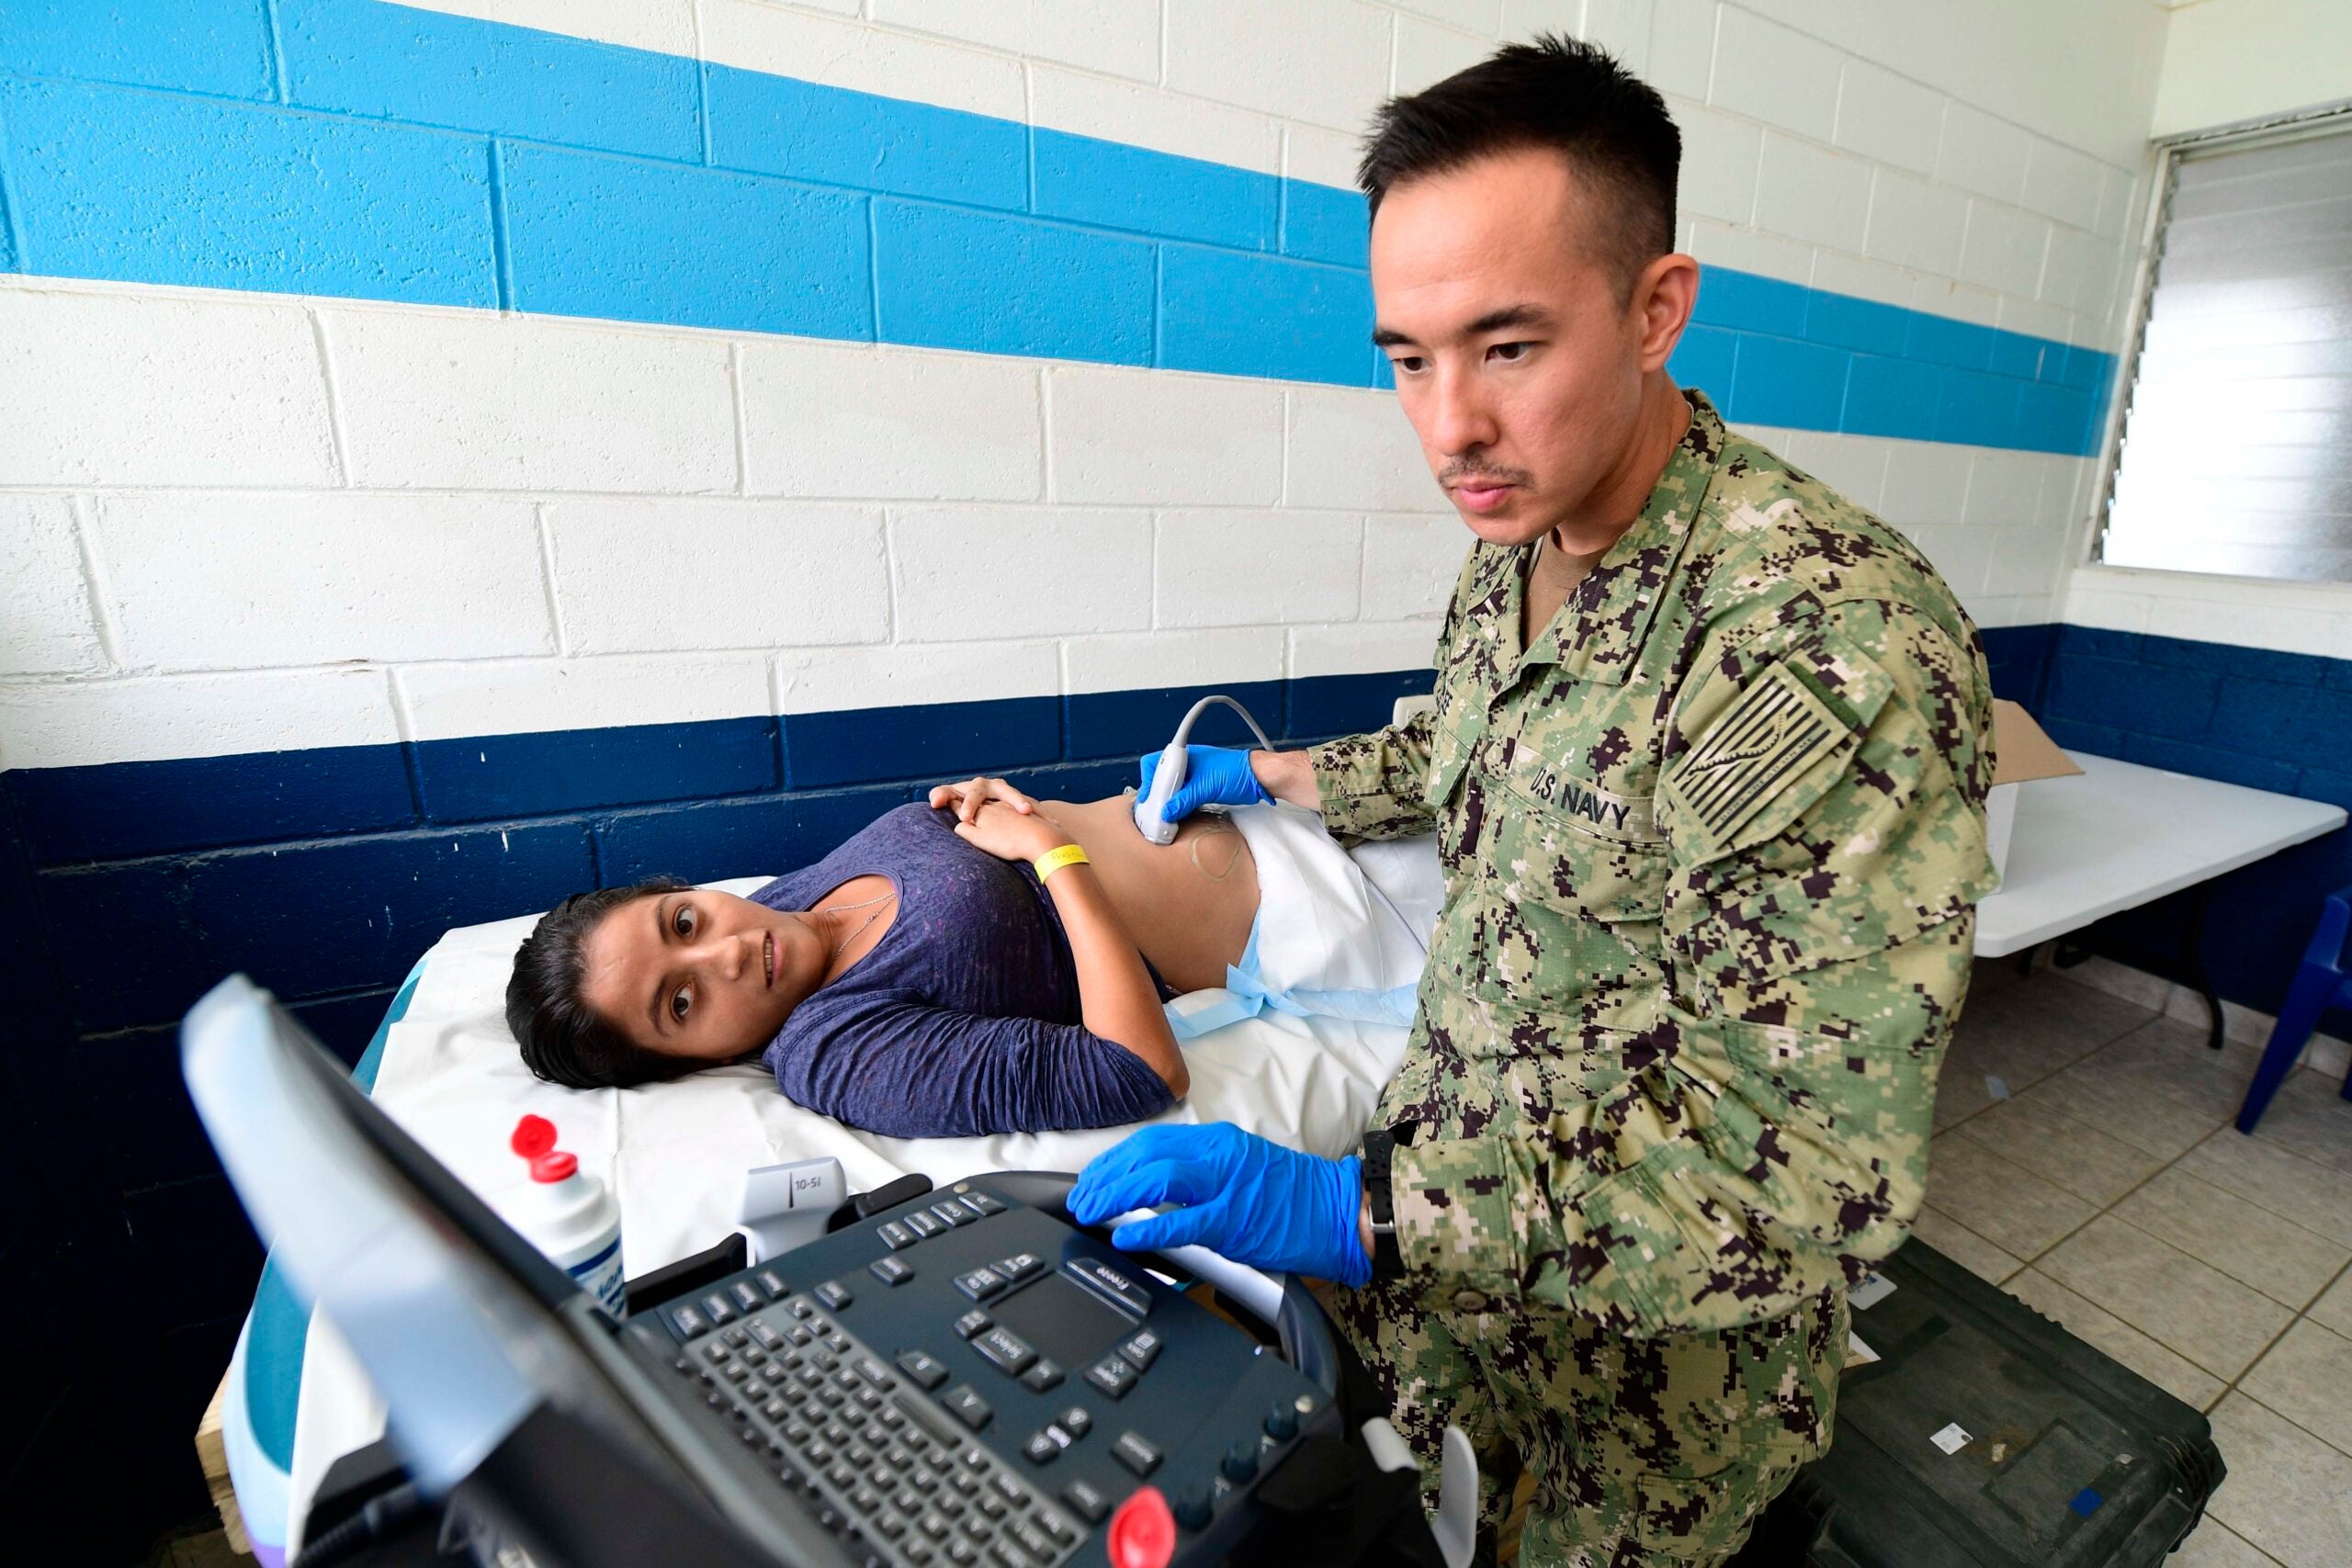 180417-N-VK873-0177 PUERTO BARRIOS, Guatemala (April 17, 2018) Lt. Cmdr. Matthew Lee, of Phoenix, Arizona, performs an ultrasound for a pregnant Guatemalan woman in Puerto Barrios, Guatemala during Continuing Promise 2018. U.S. Naval Forces Southern Command/U.S. 4th Fleet has deployed a force to execute Continuing Promise to conduct civil-military operations including humanitarian assistance, training engagements, and medical, dental, and veterinary support in an effort to show U.S. support and commitment to Central and South America. (U.S. Navy photo by Mass Communication Specialist 2nd Class Kayla Cosby/ Released)